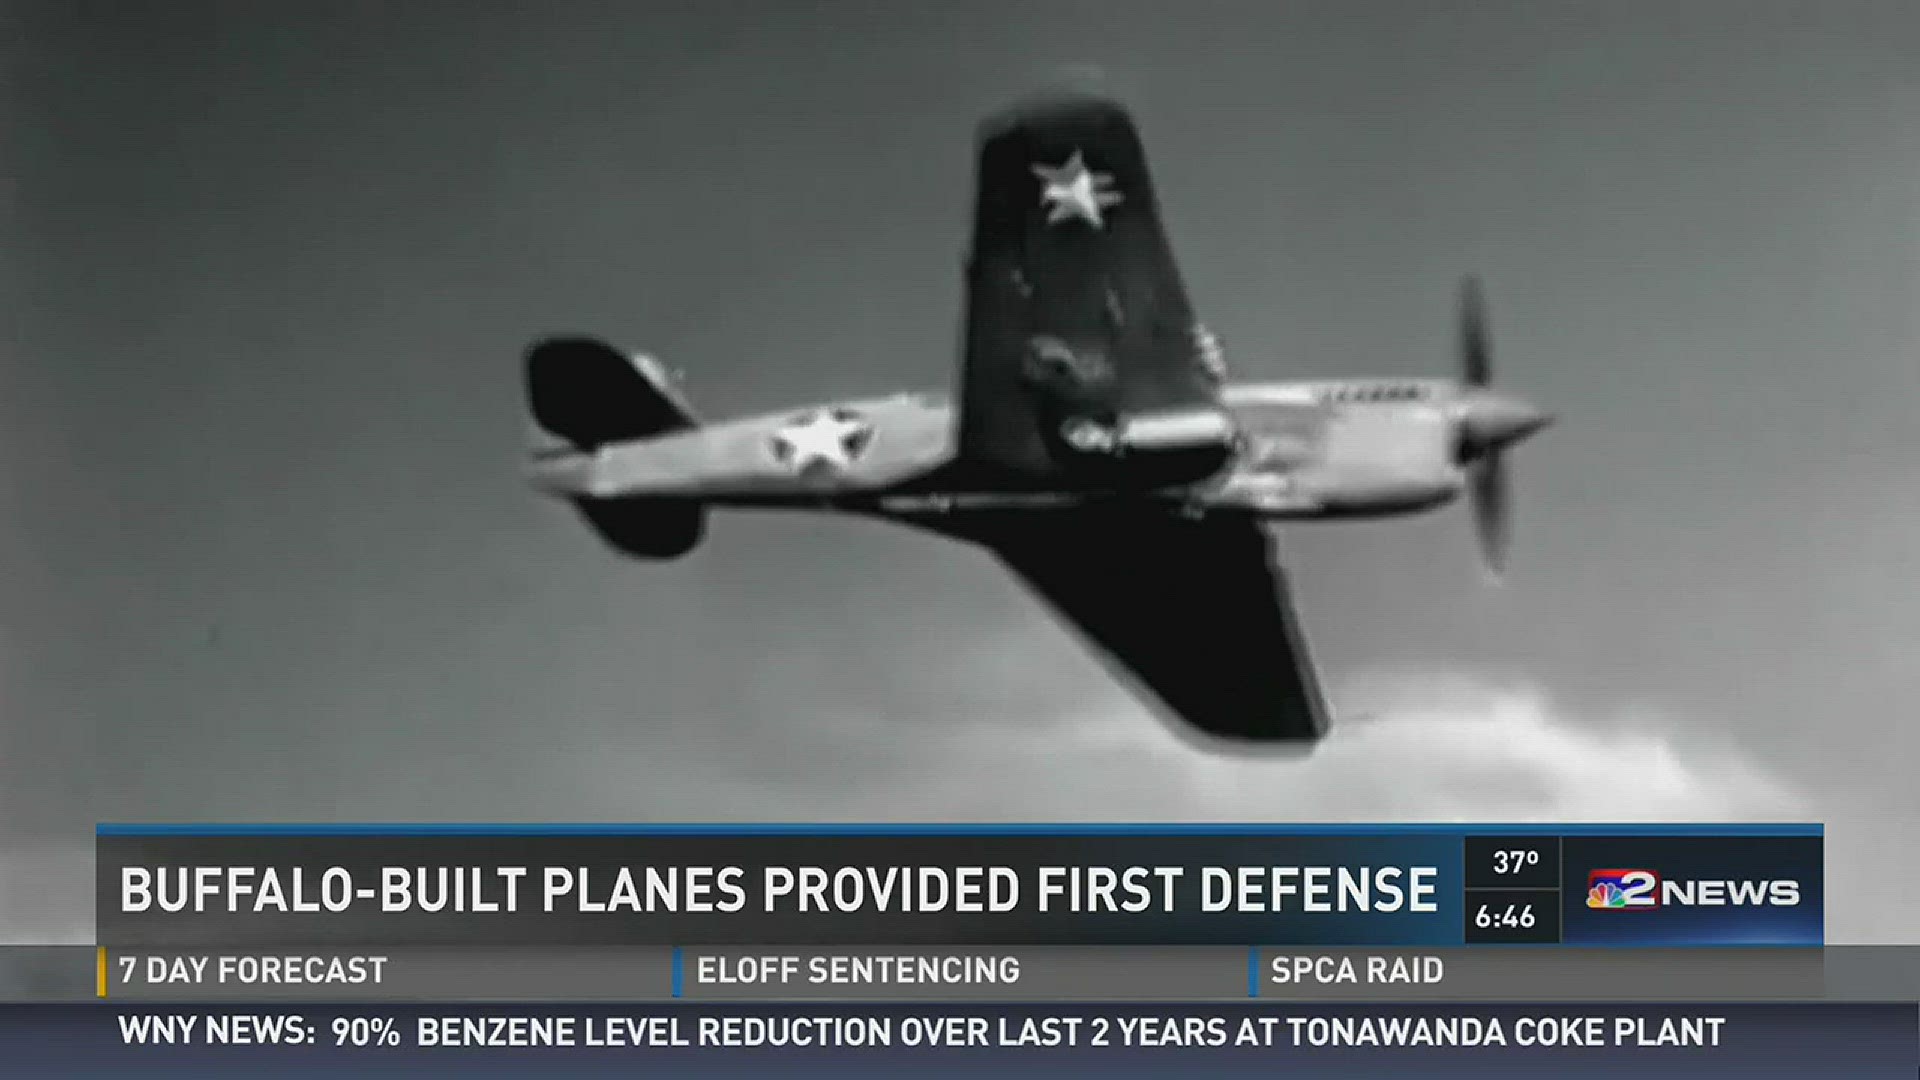 Daybreak's Pete Gallivan tells us the Unknown Story of how Buffalo-built planes provided the first defense after the Pearl Harbor attacks 75 years ago.